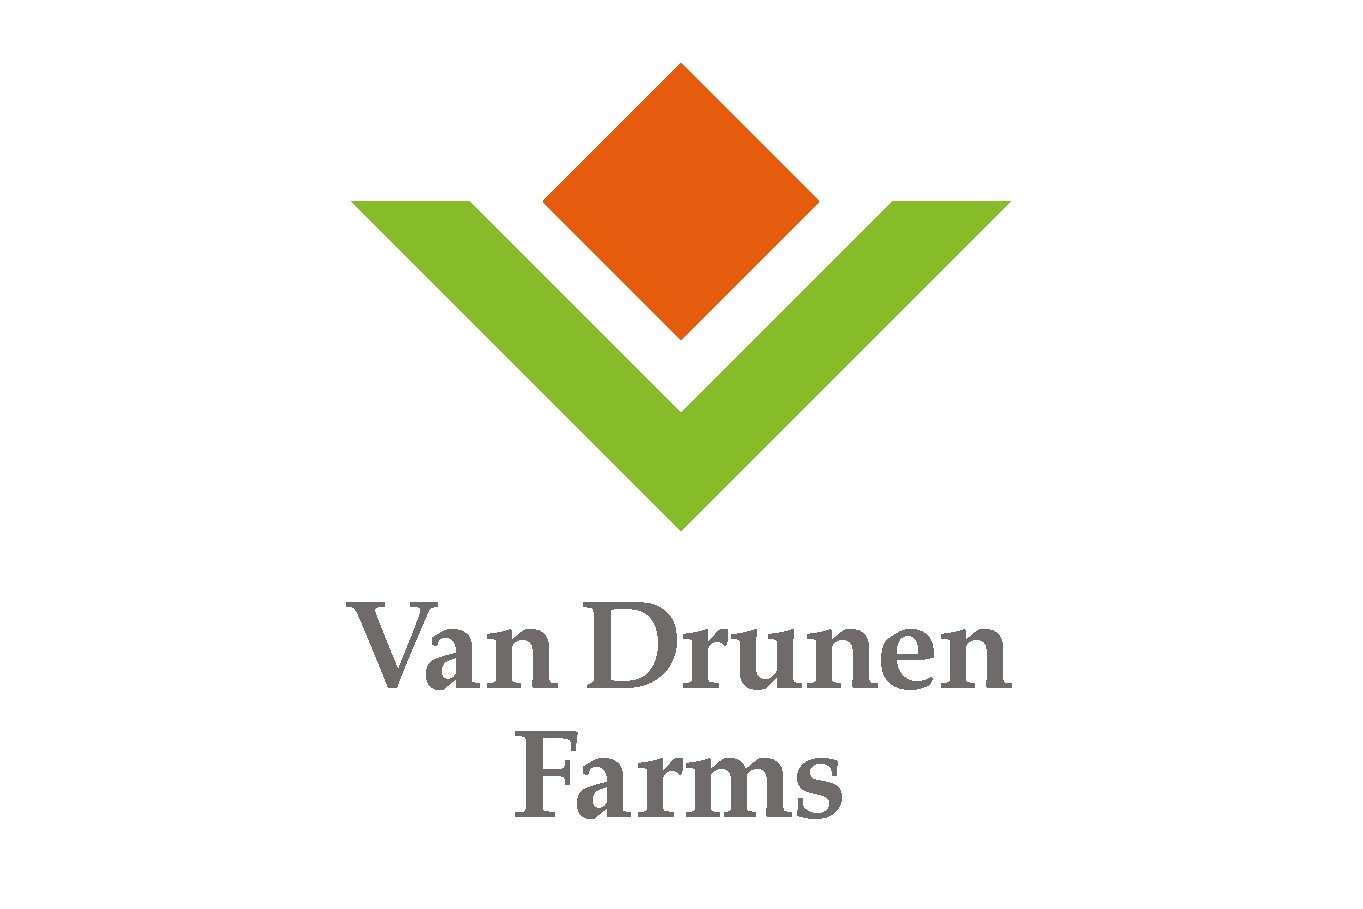 Van Drunen Farms Commitment to Quality for More than a Century OU